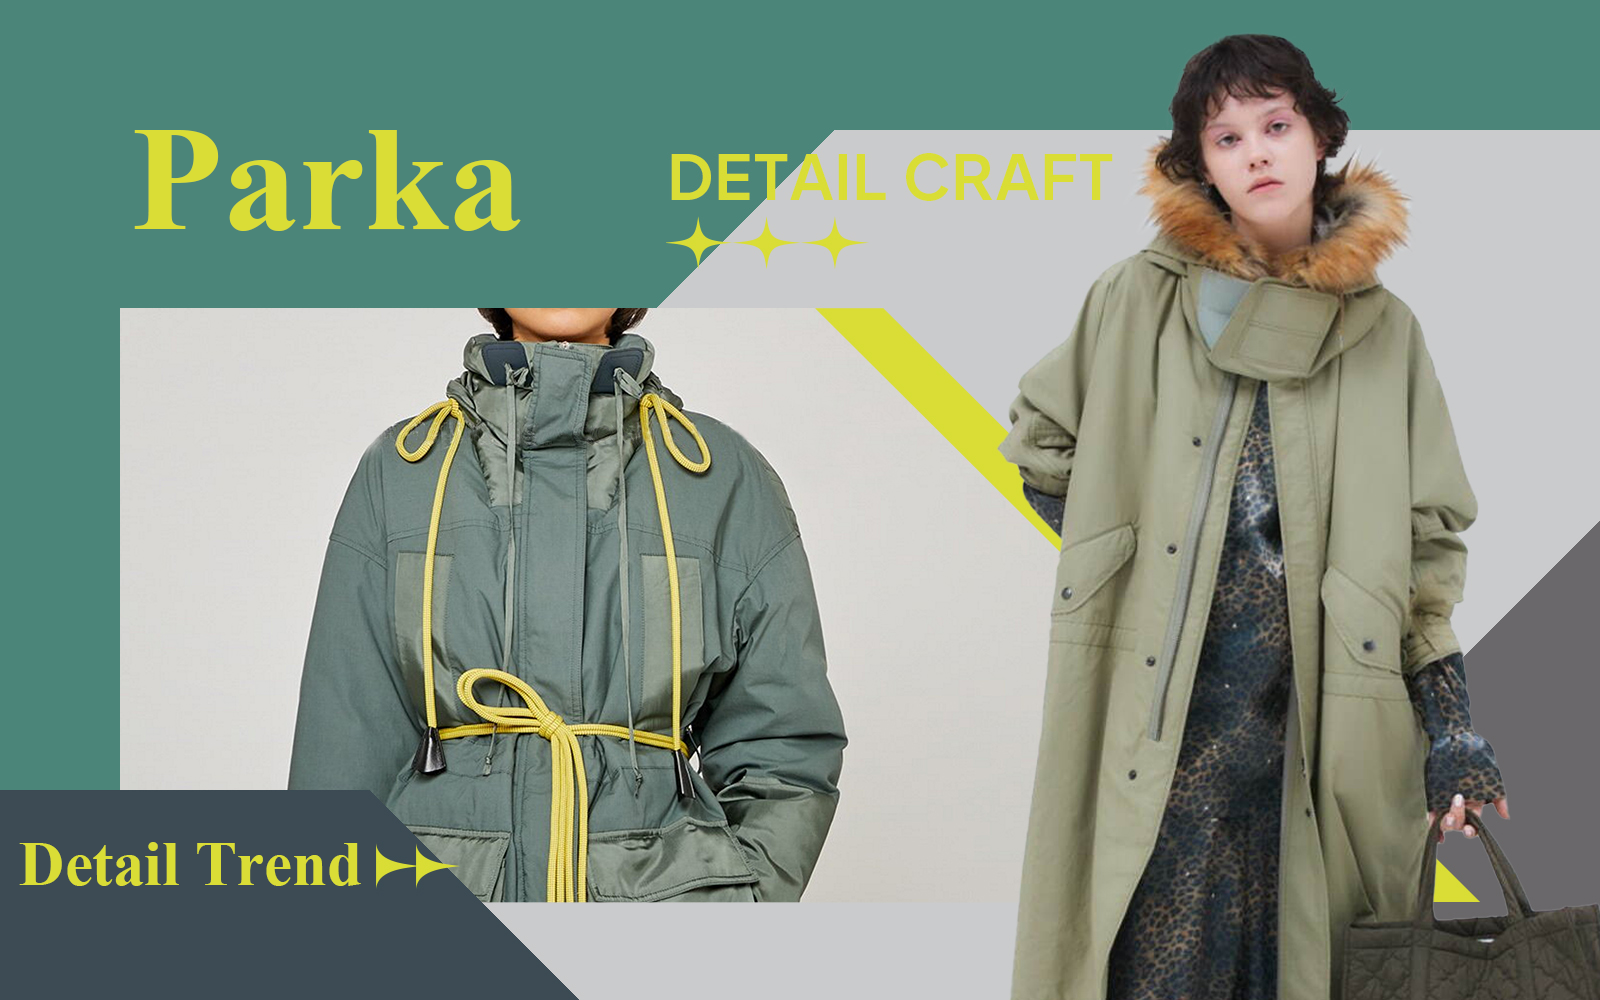 The Detail & Craft Trend for Parka